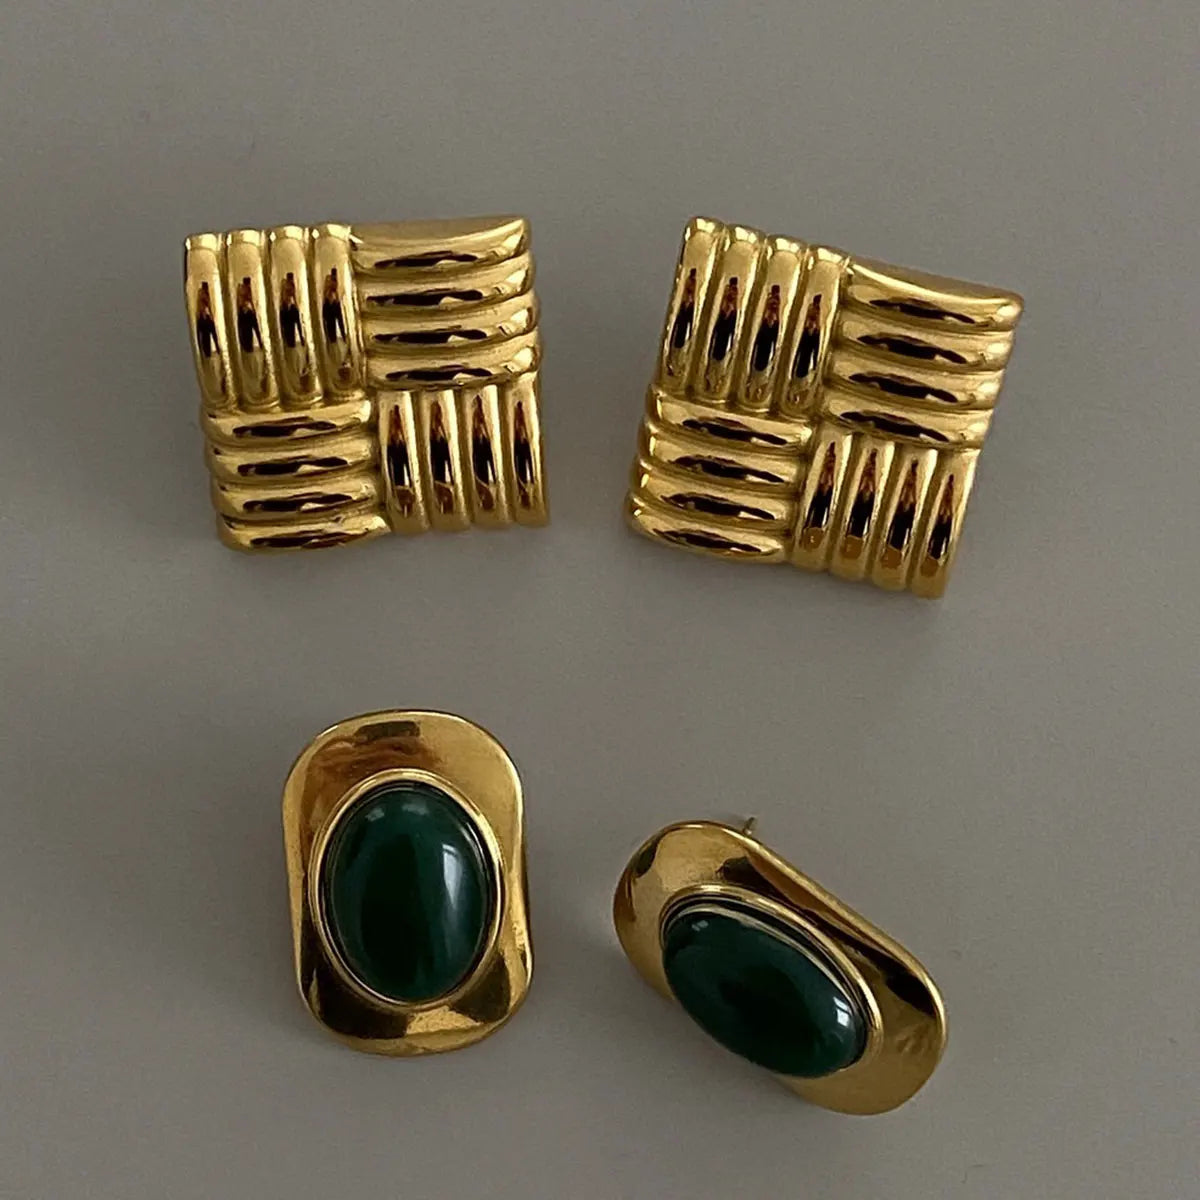 18k Gold Color Plated Stainless Steel Statement Earrings With Green Stone